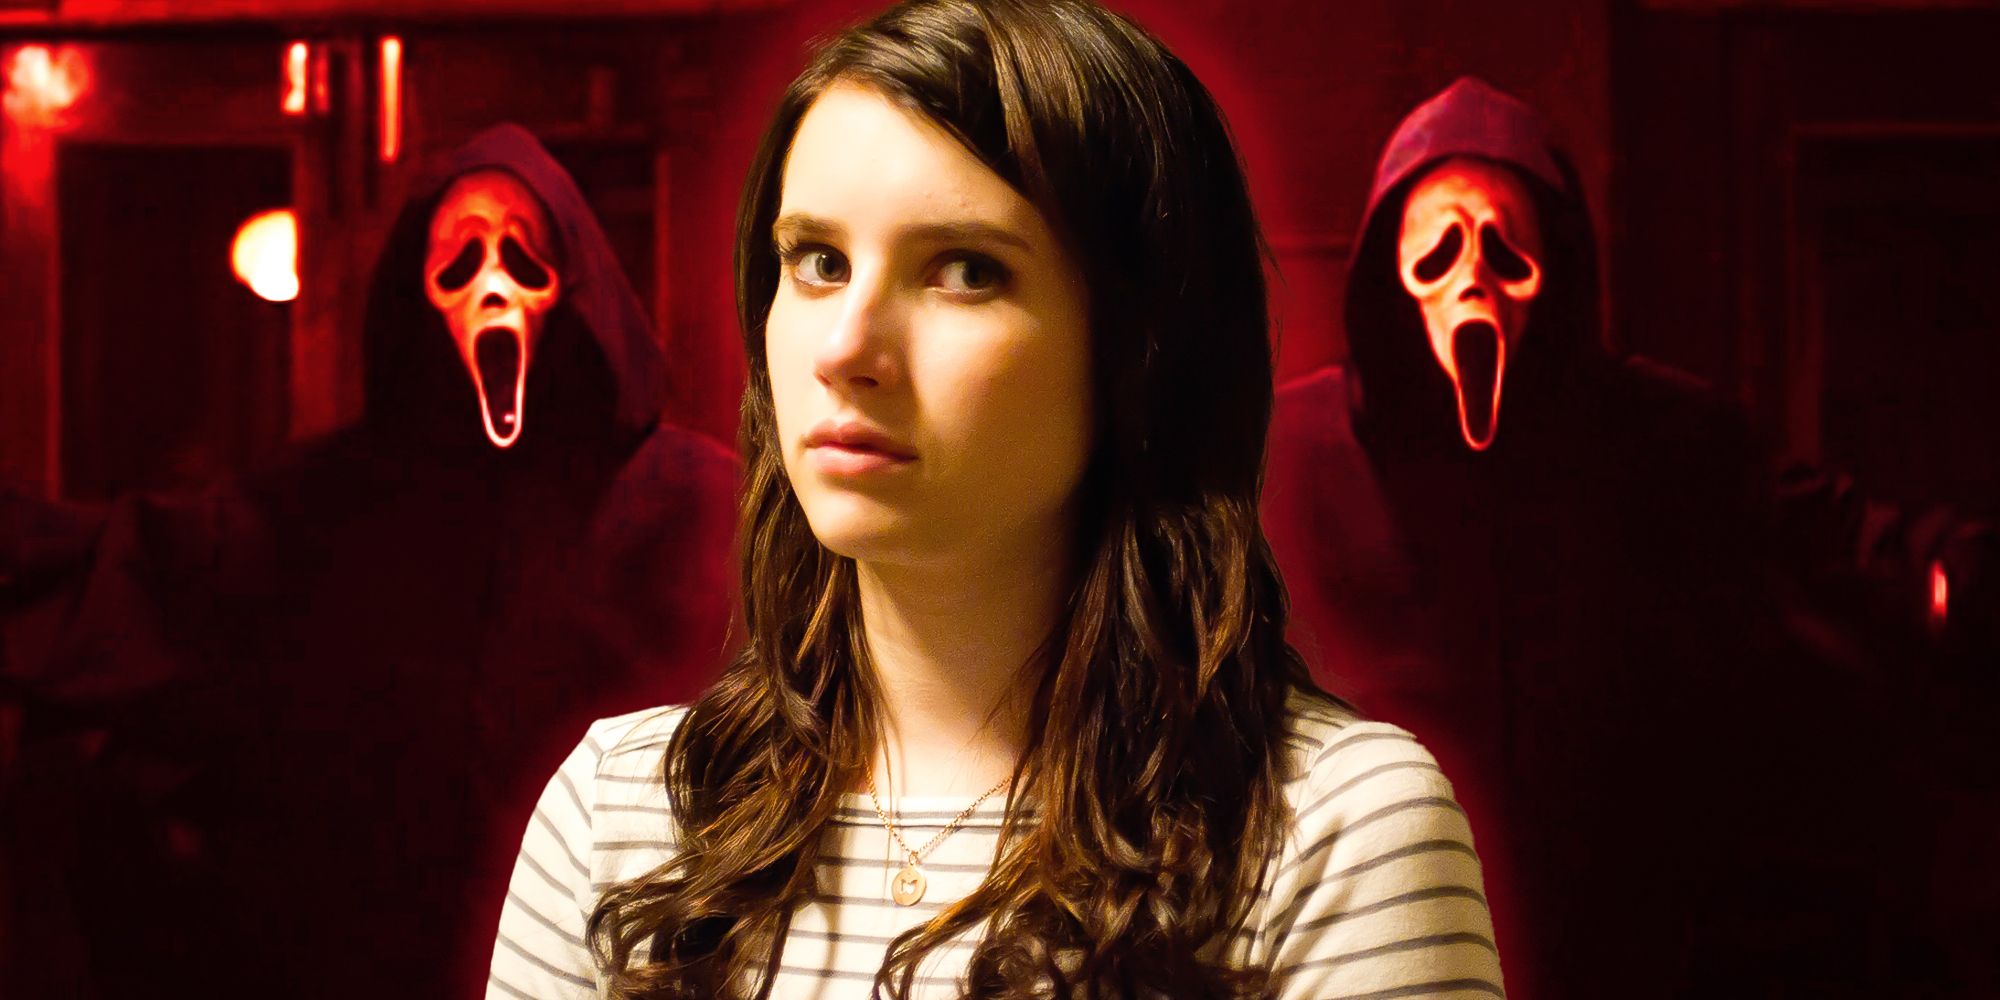 Emma Roberts as Jill in Scream 4 with Ghostfaces from Scream 6 in background